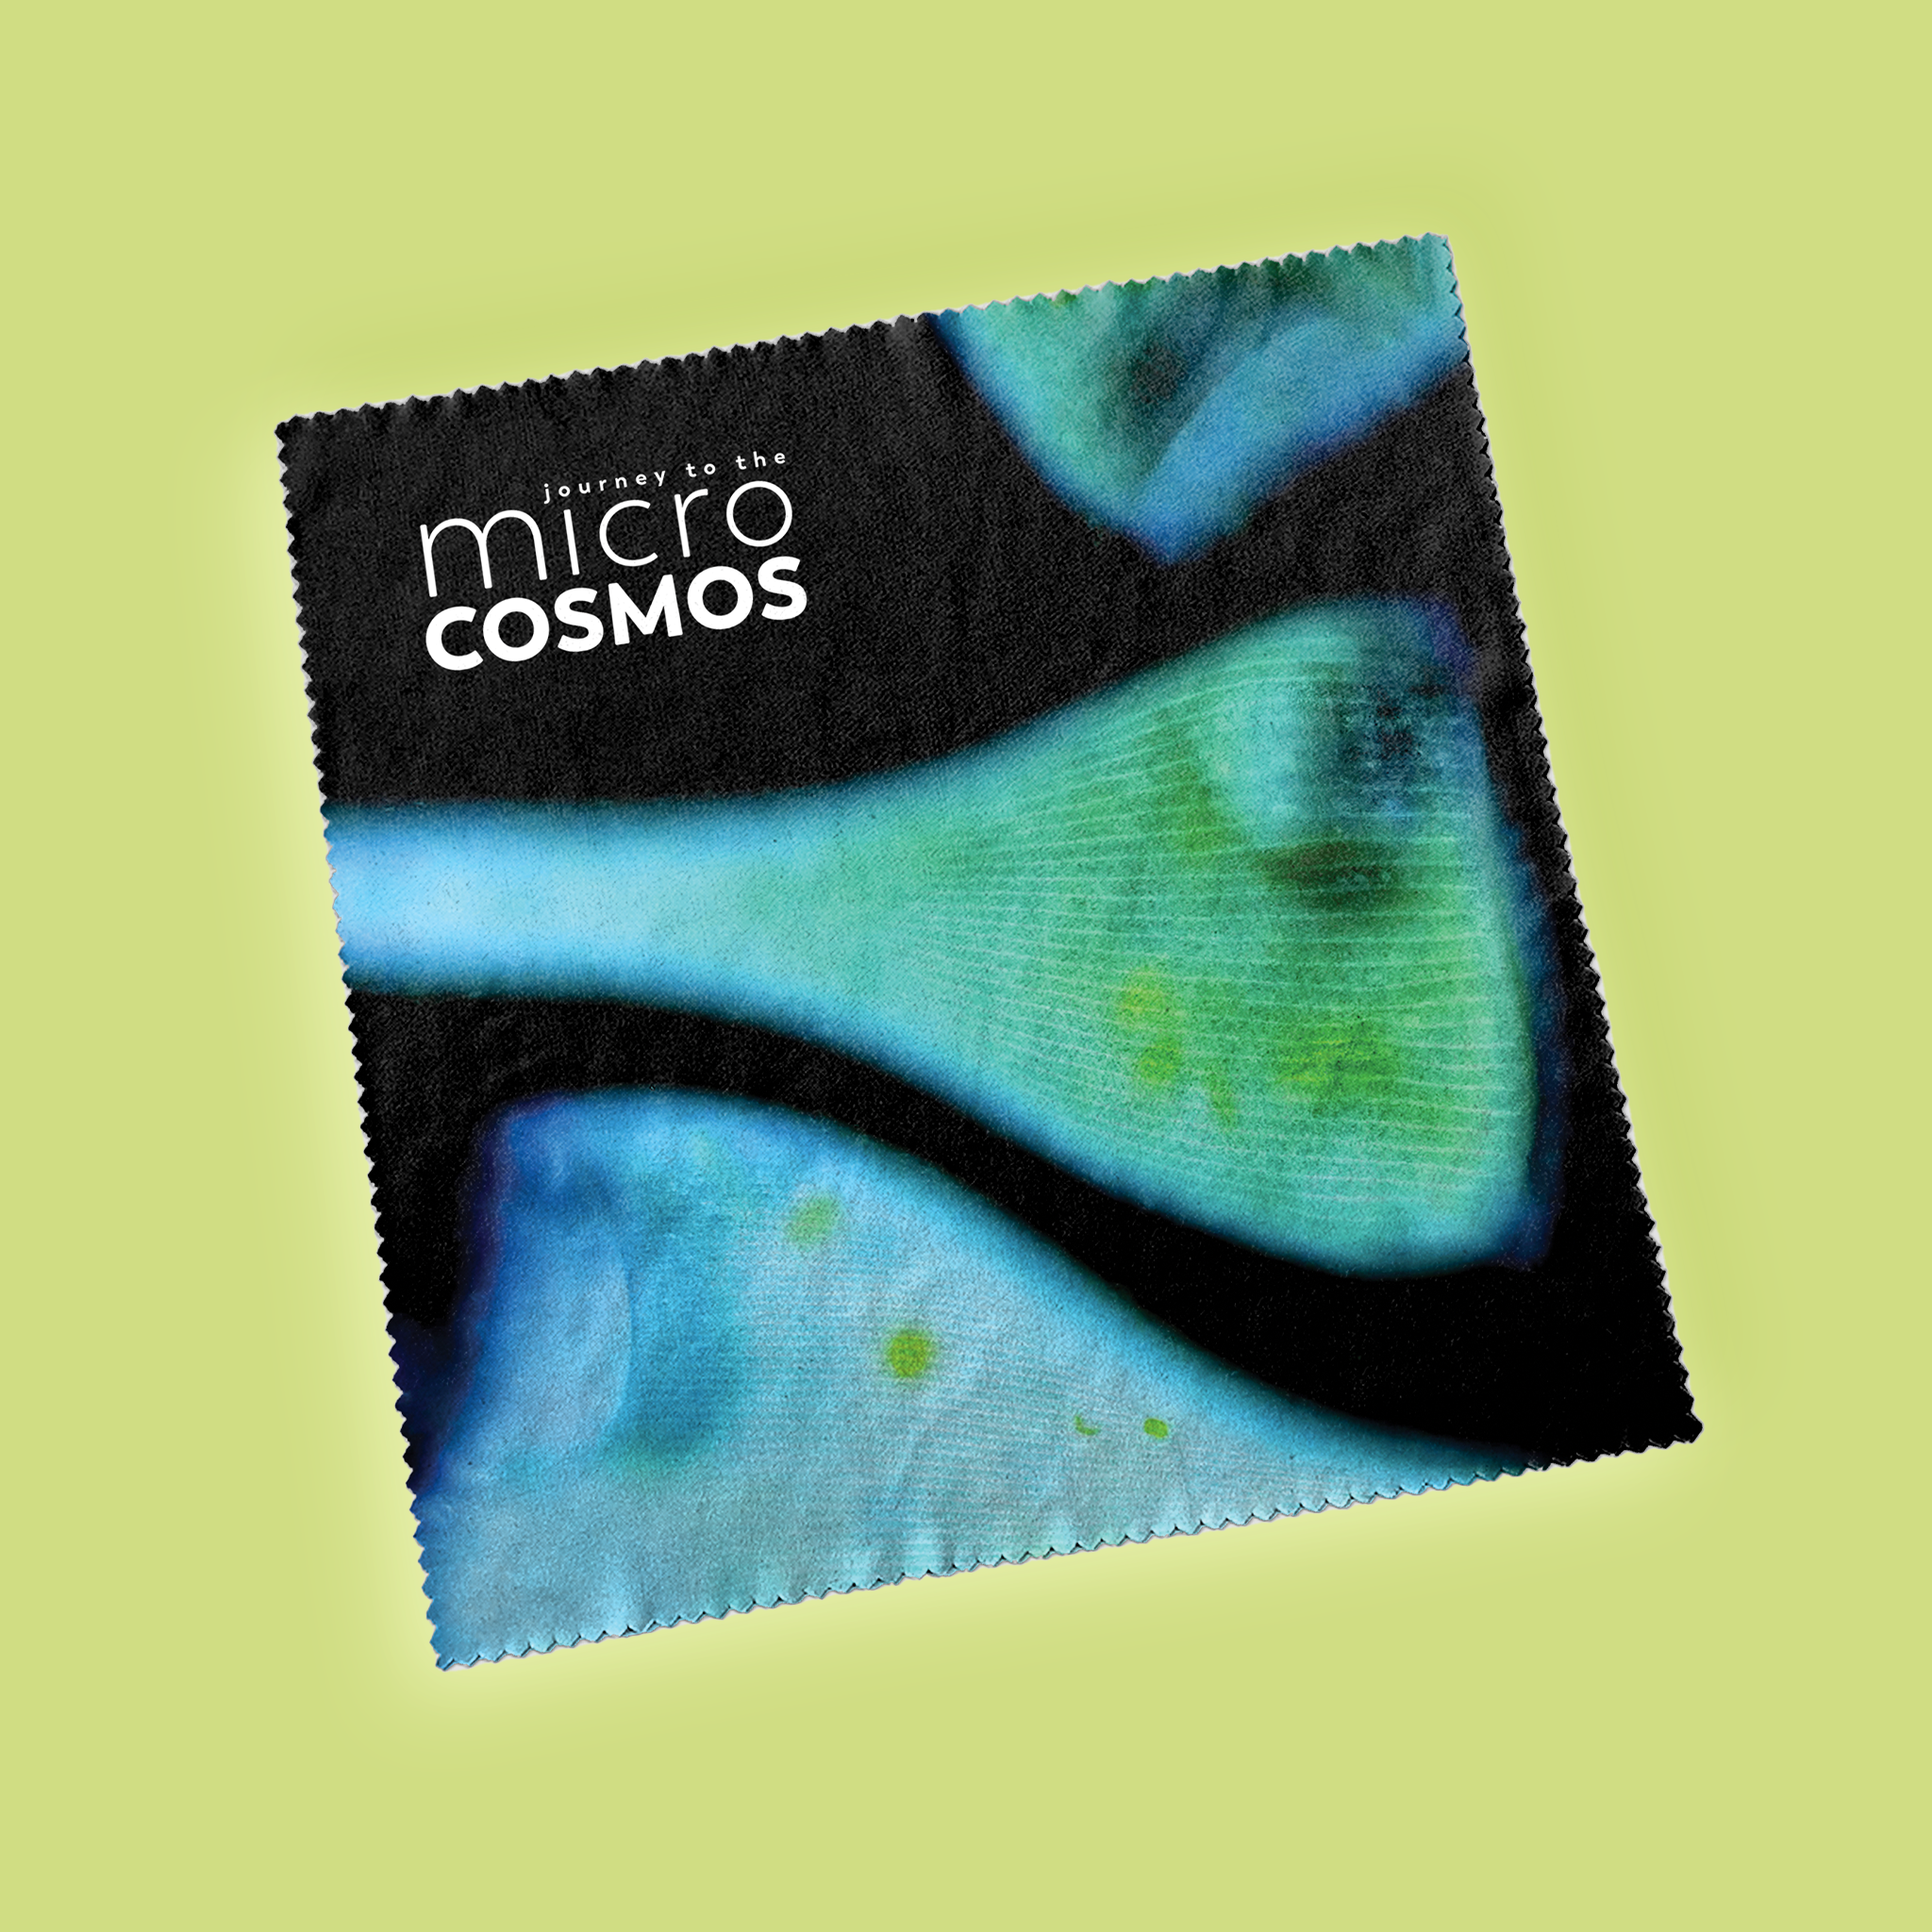 Journey To The Microcosmos